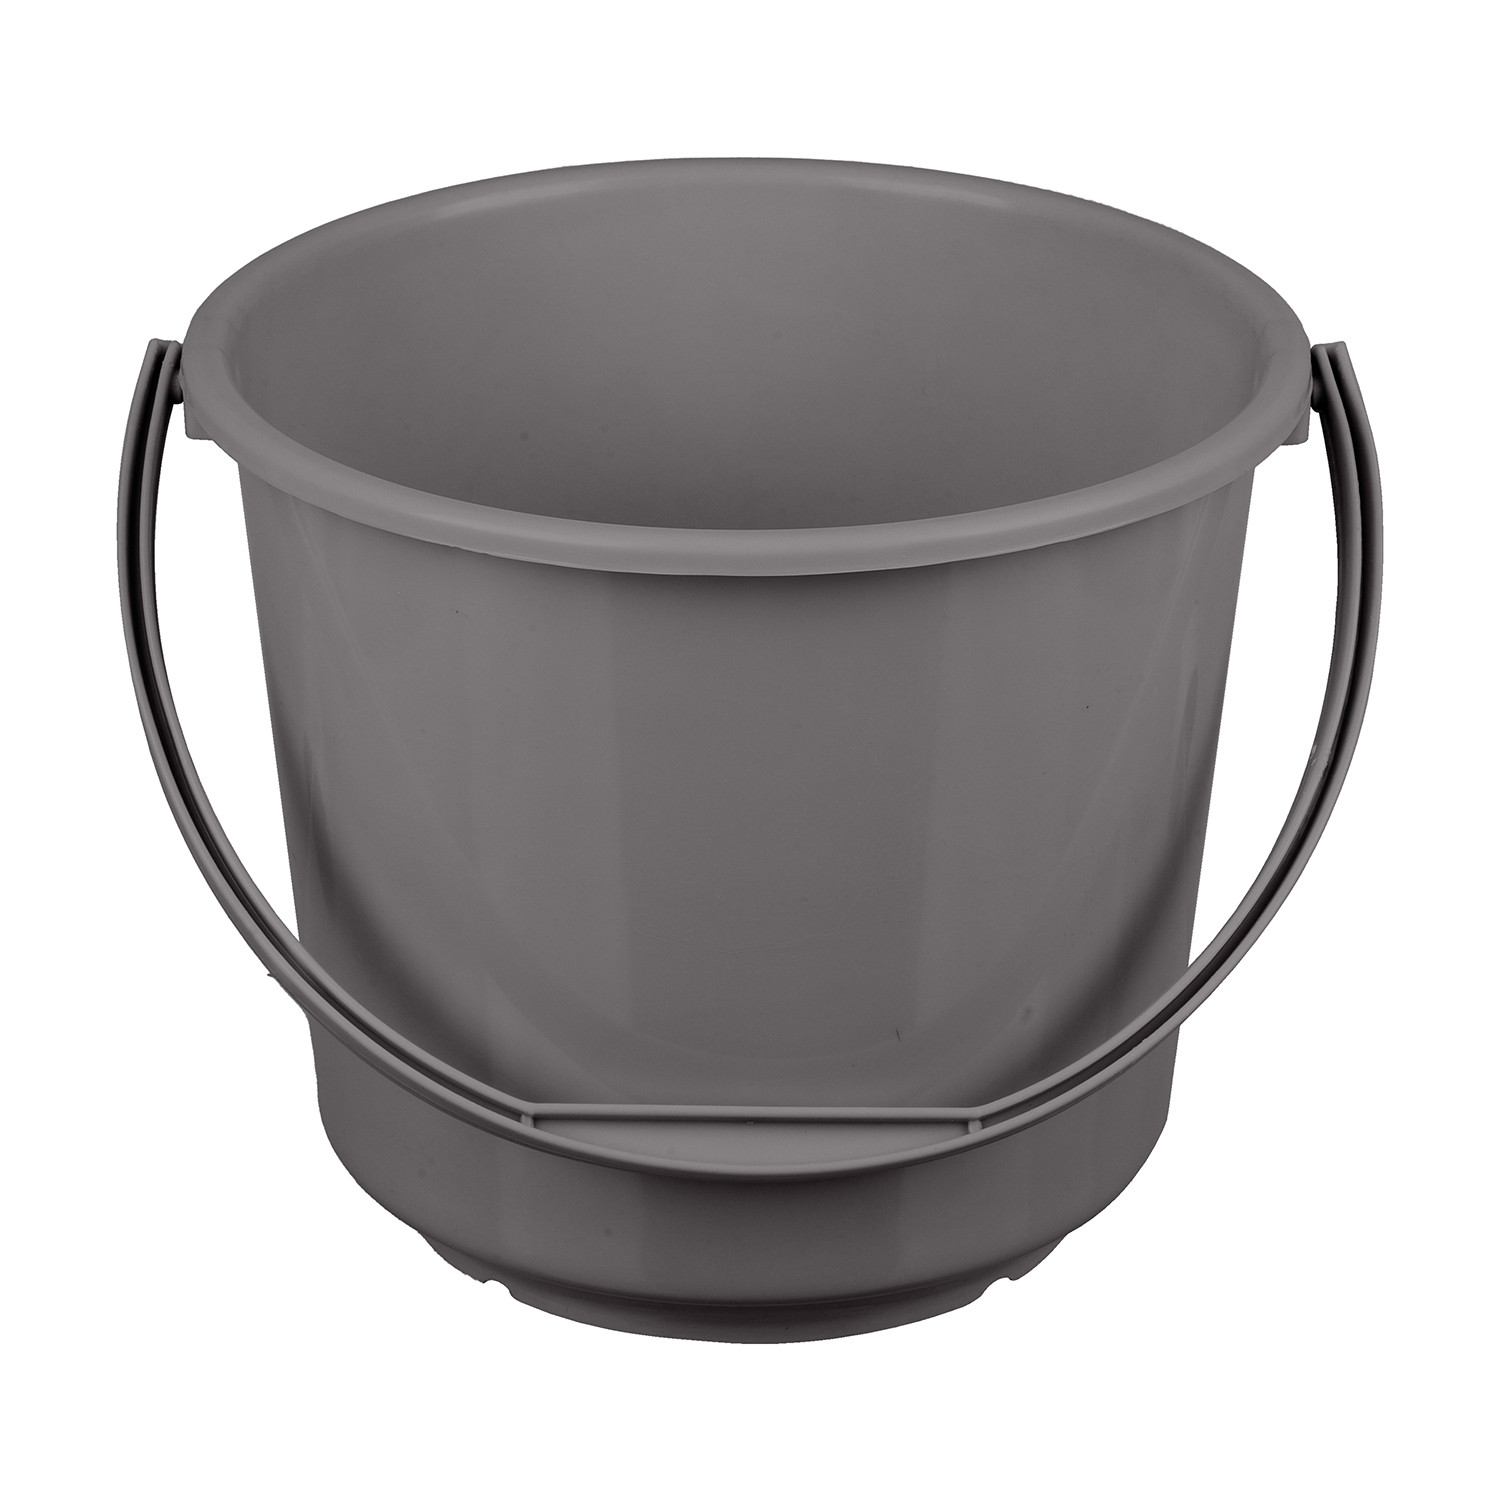 Kuber Industries Bucket | Plastic Bucket for Mopping | Bucket for Cleaning | Storage Container Bucket | Water Storage Bucket | Bathroom Bucket | Plain Bucket | 5 LTR | Pack of 3 | Multi